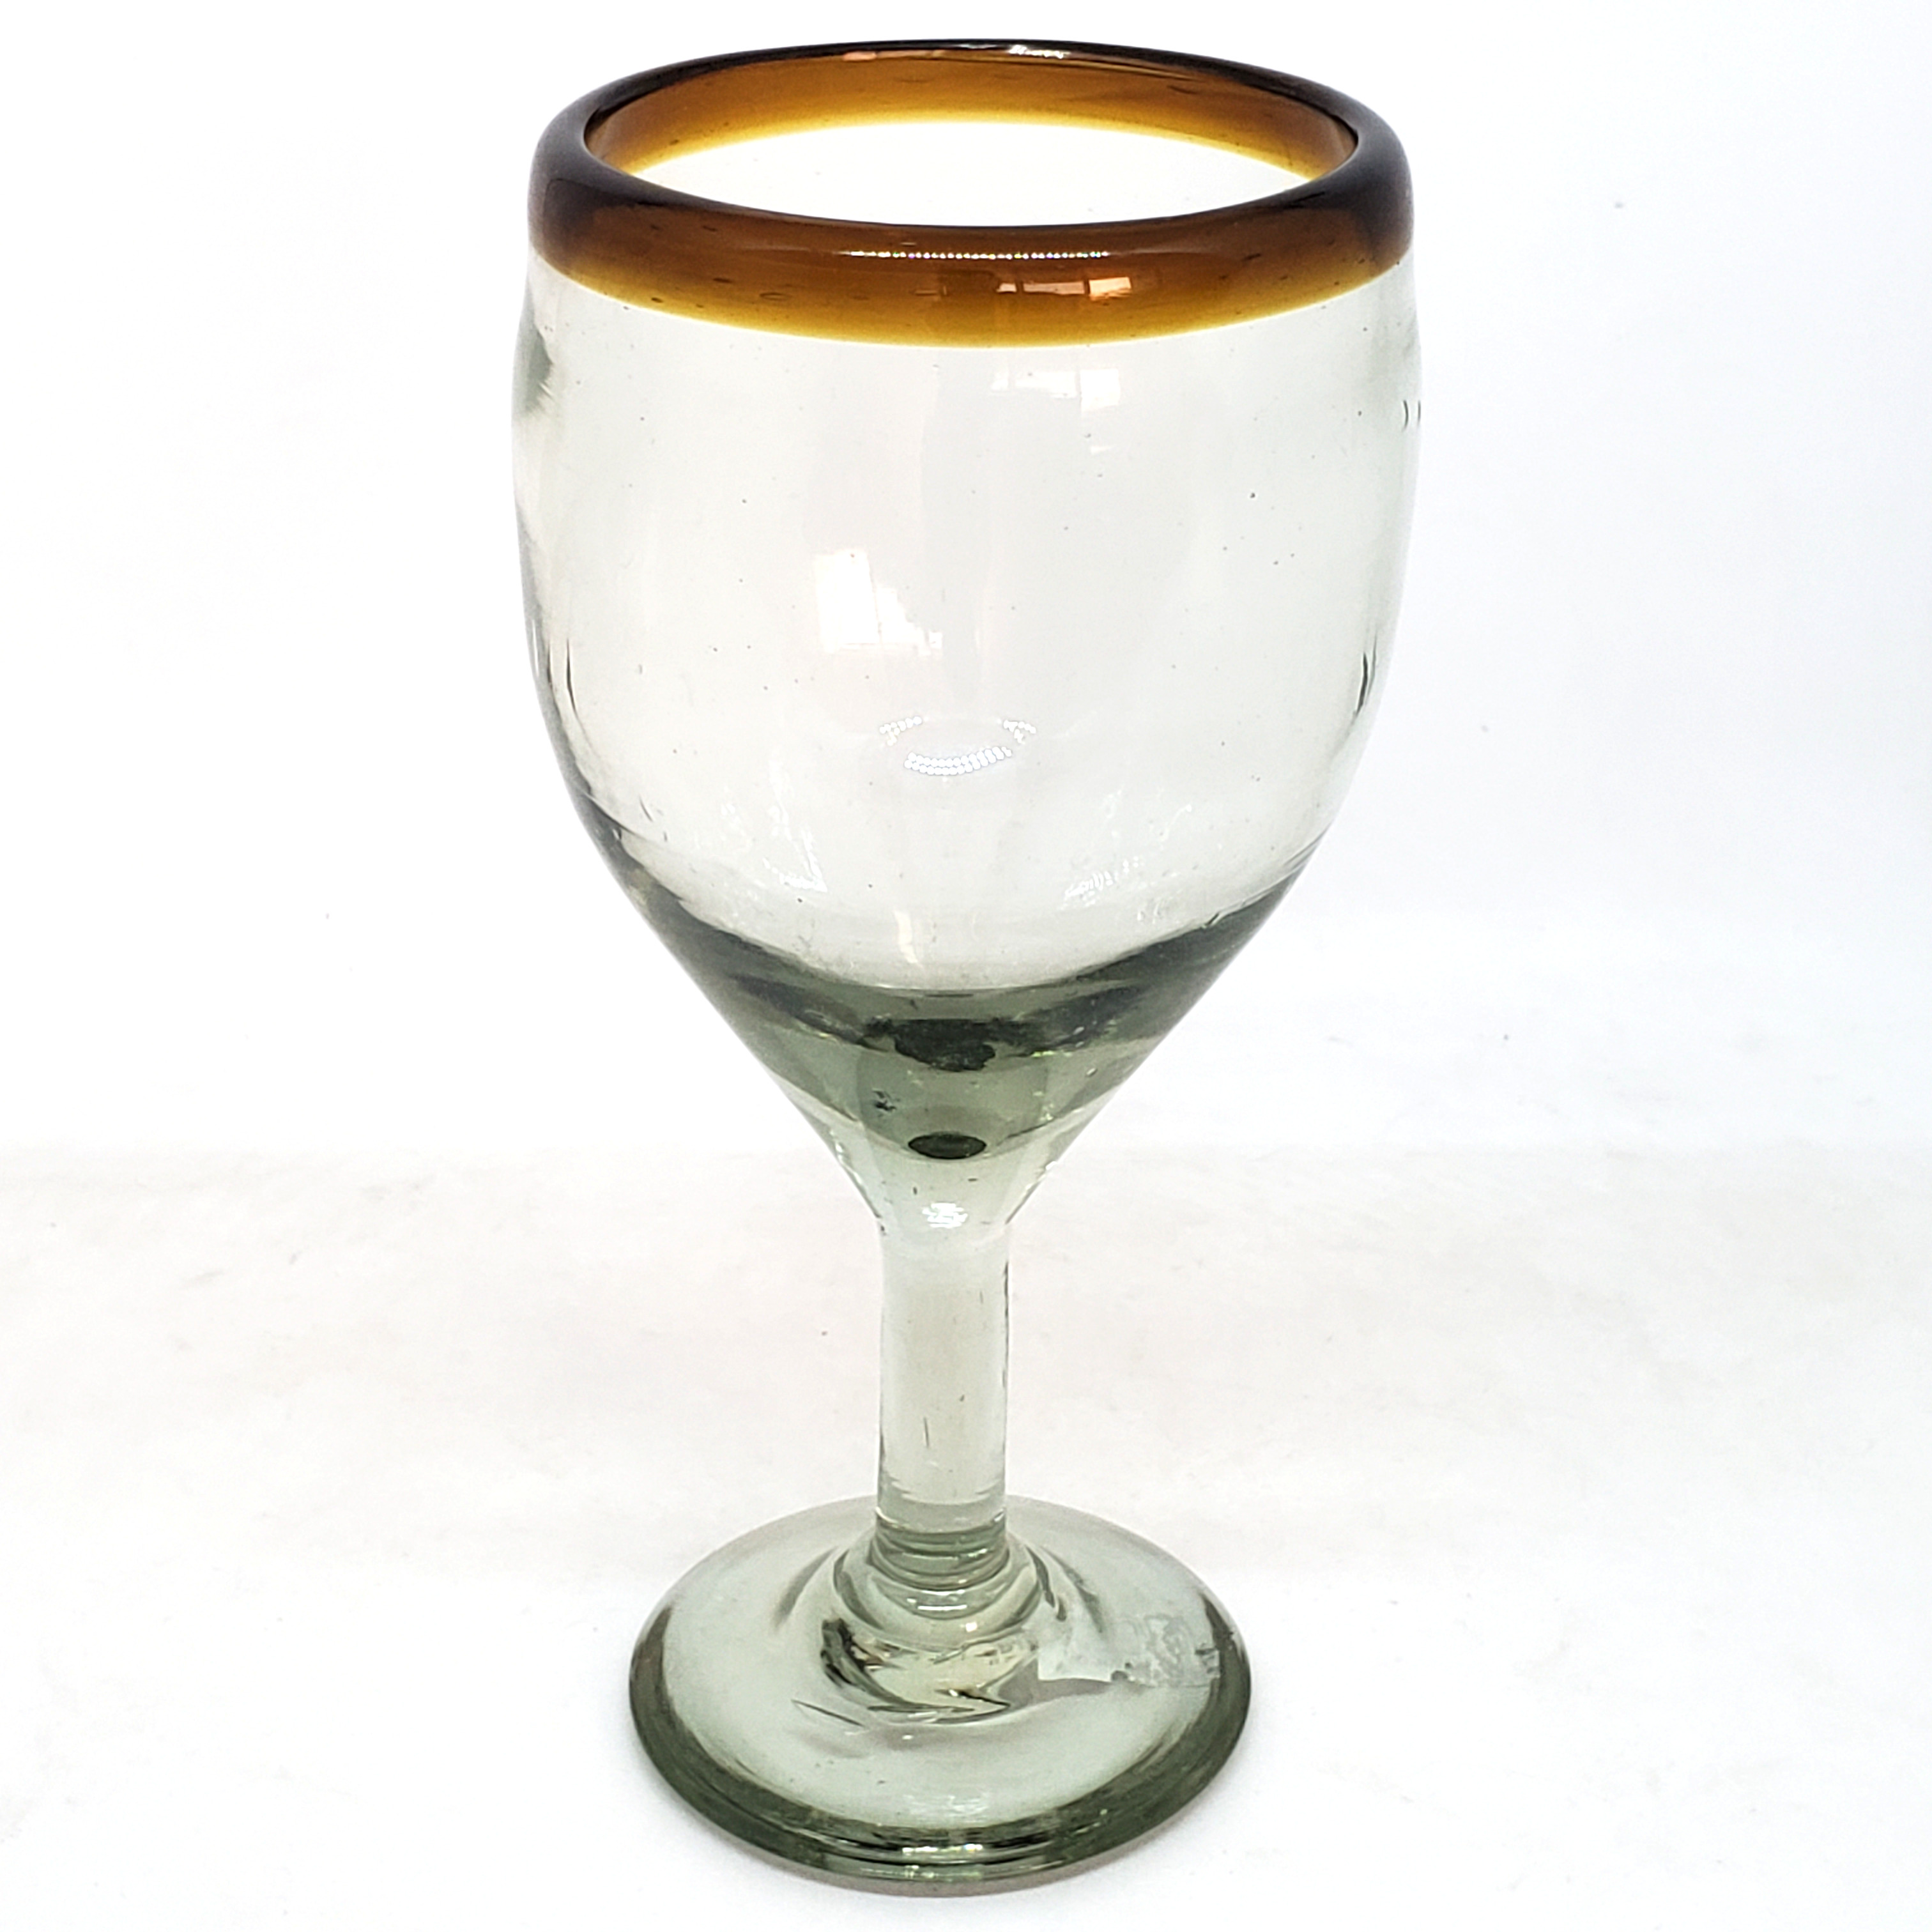 Wholesale Amber Rim Glassware / Amber Rim 13 oz Wine Glasses  / Capture the bouquet of fine red wine with these wine glasses bordered with a bright, amber rim.